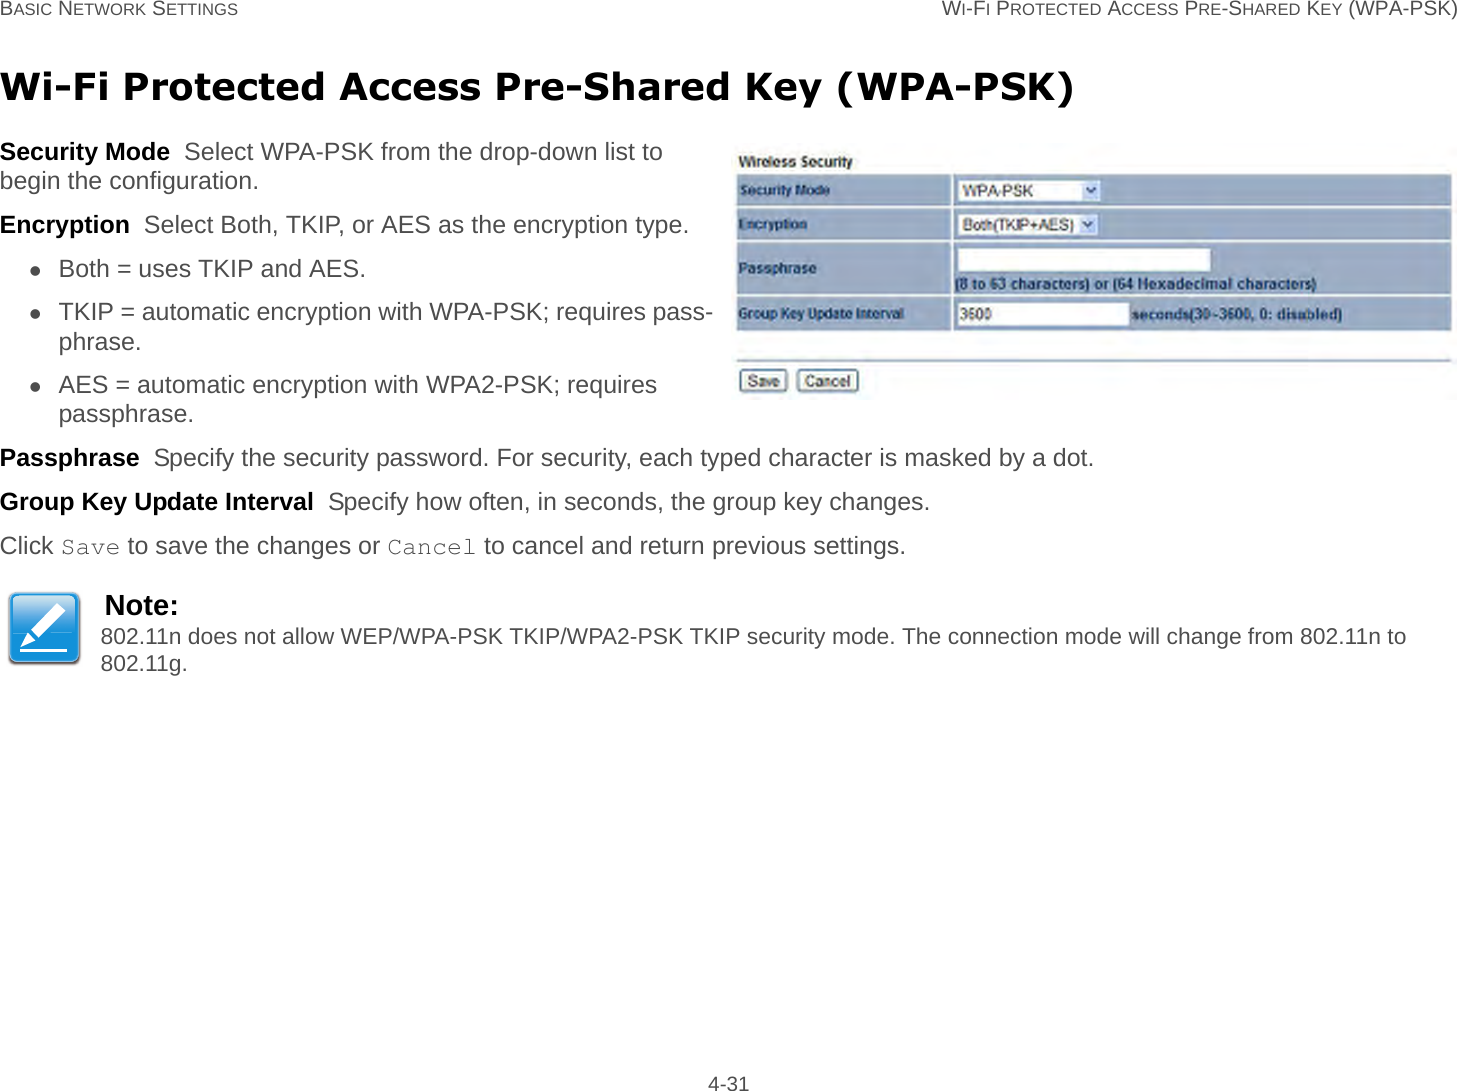 BASIC NETWORK SETTINGS WI-FI PROTECTED ACCESS PRE-SHARED KEY (WPA-PSK) 4-31Wi-Fi Protected Access Pre-Shared Key (WPA-PSK)Security Mode  Select WPA-PSK from the drop-down list to begin the configuration.Encryption  Select Both, TKIP, or AES as the encryption type.Both = uses TKIP and AES.TKIP = automatic encryption with WPA-PSK; requires pass-phrase.AES = automatic encryption with WPA2-PSK; requires passphrase.Passphrase  Specify the security password. For security, each typed character is masked by a dot.Group Key Update Interval  Specify how often, in seconds, the group key changes.Click Save to save the changes or Cancel to cancel and return previous settings.Note:802.11n does not allow WEP/WPA-PSK TKIP/WPA2-PSK TKIP security mode. The connection mode will change from 802.11n to 802.11g.